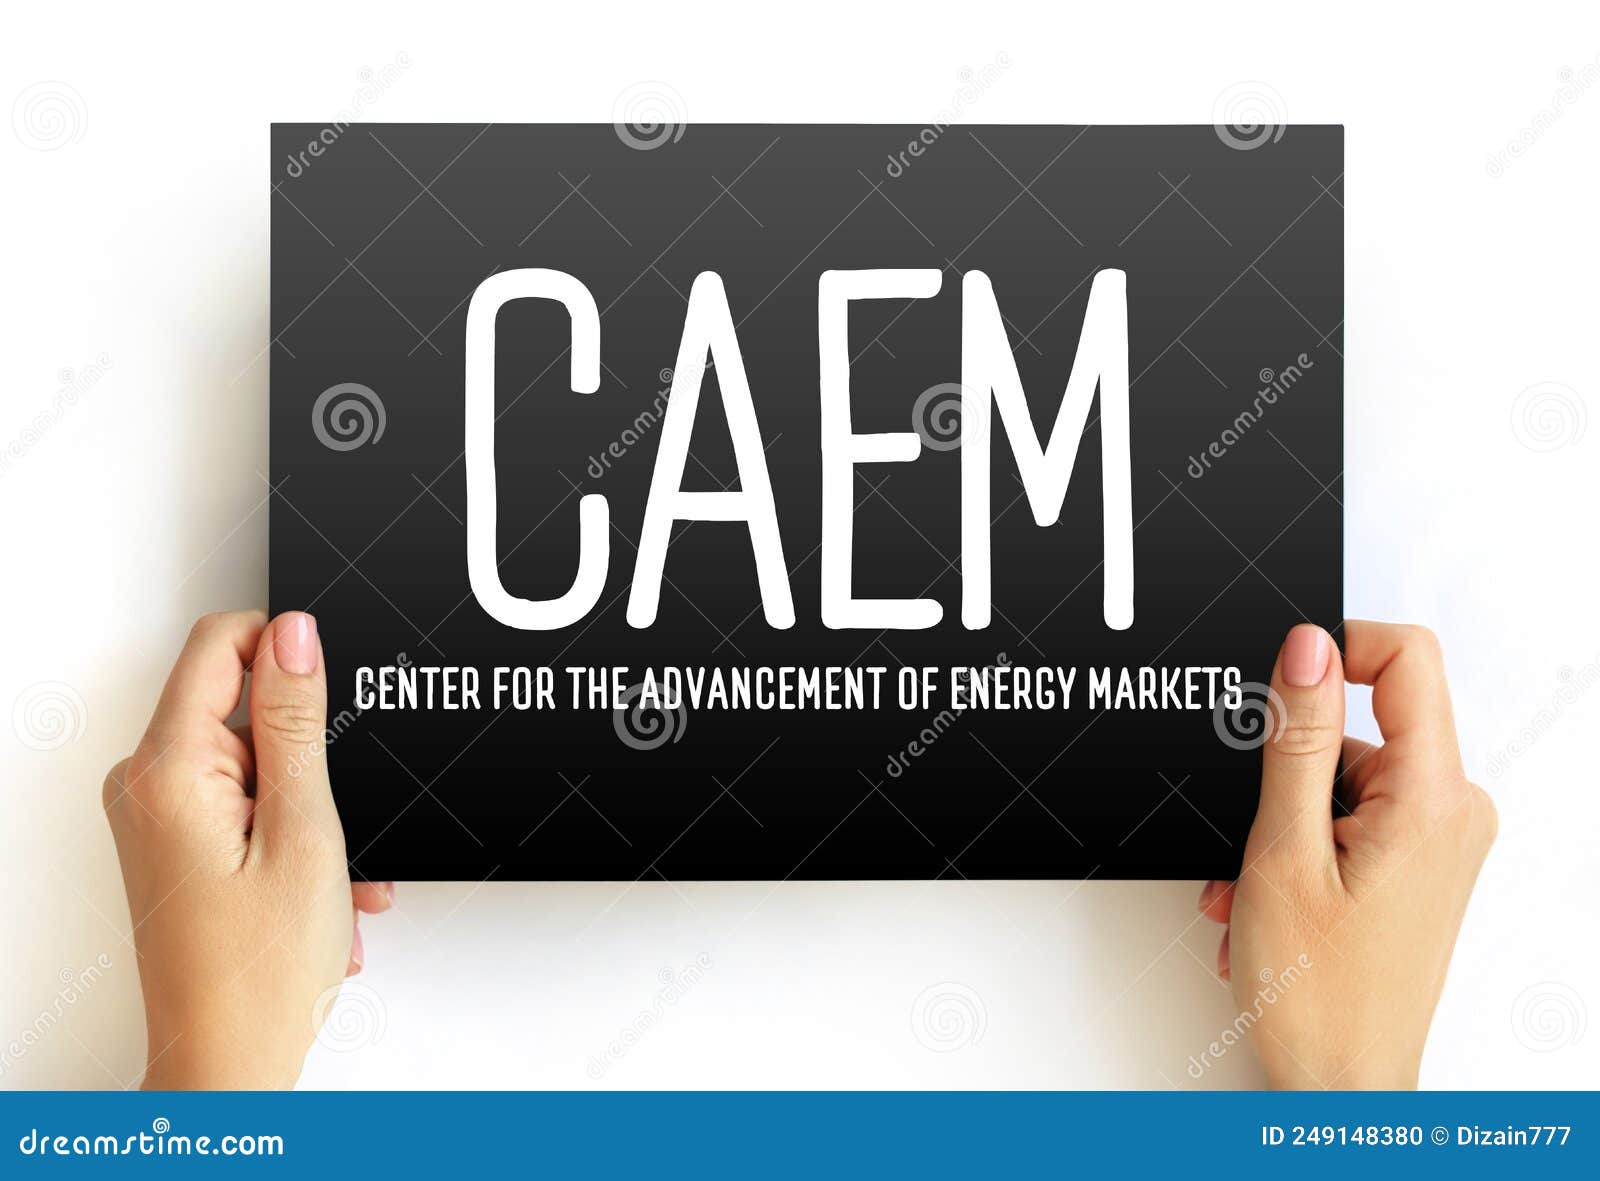 caem - center for the advancement of energy markets acronym text on card, abbreviation concept background